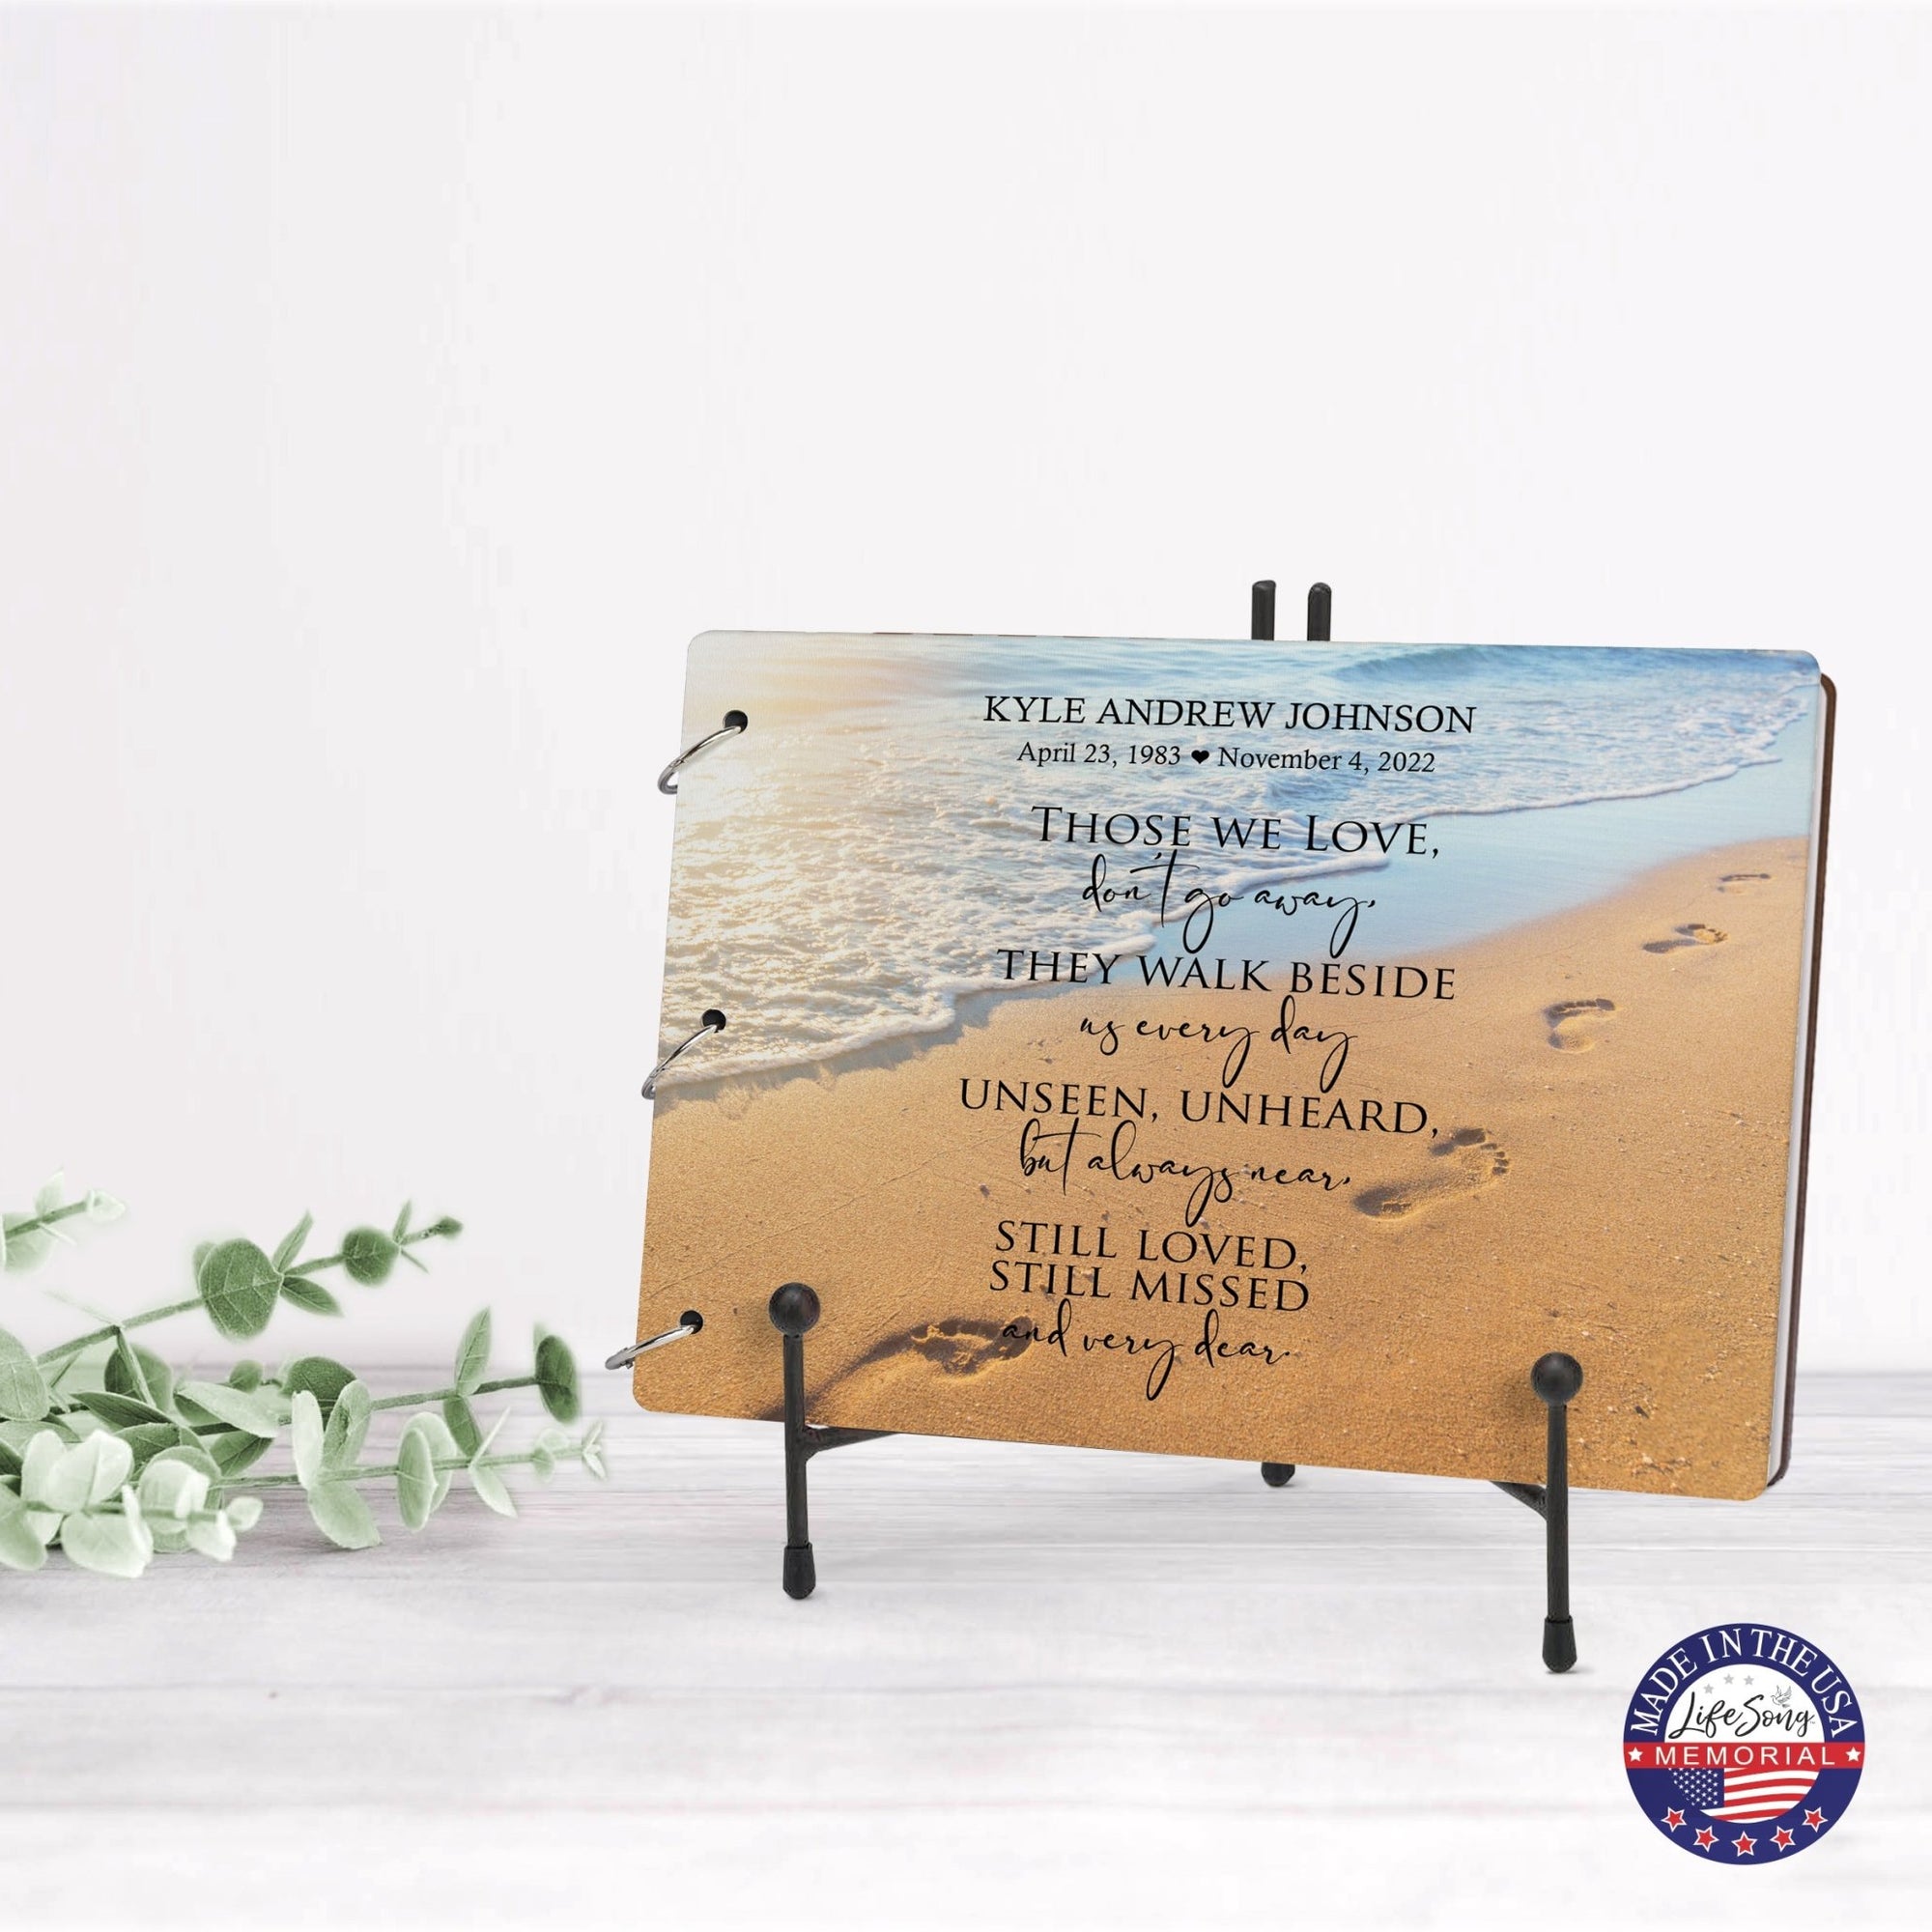 Personalized Celebration Of Life Funeral Guest Books For Memorial Services Registry With Wooden Cover - Those We Love - LifeSong Milestones